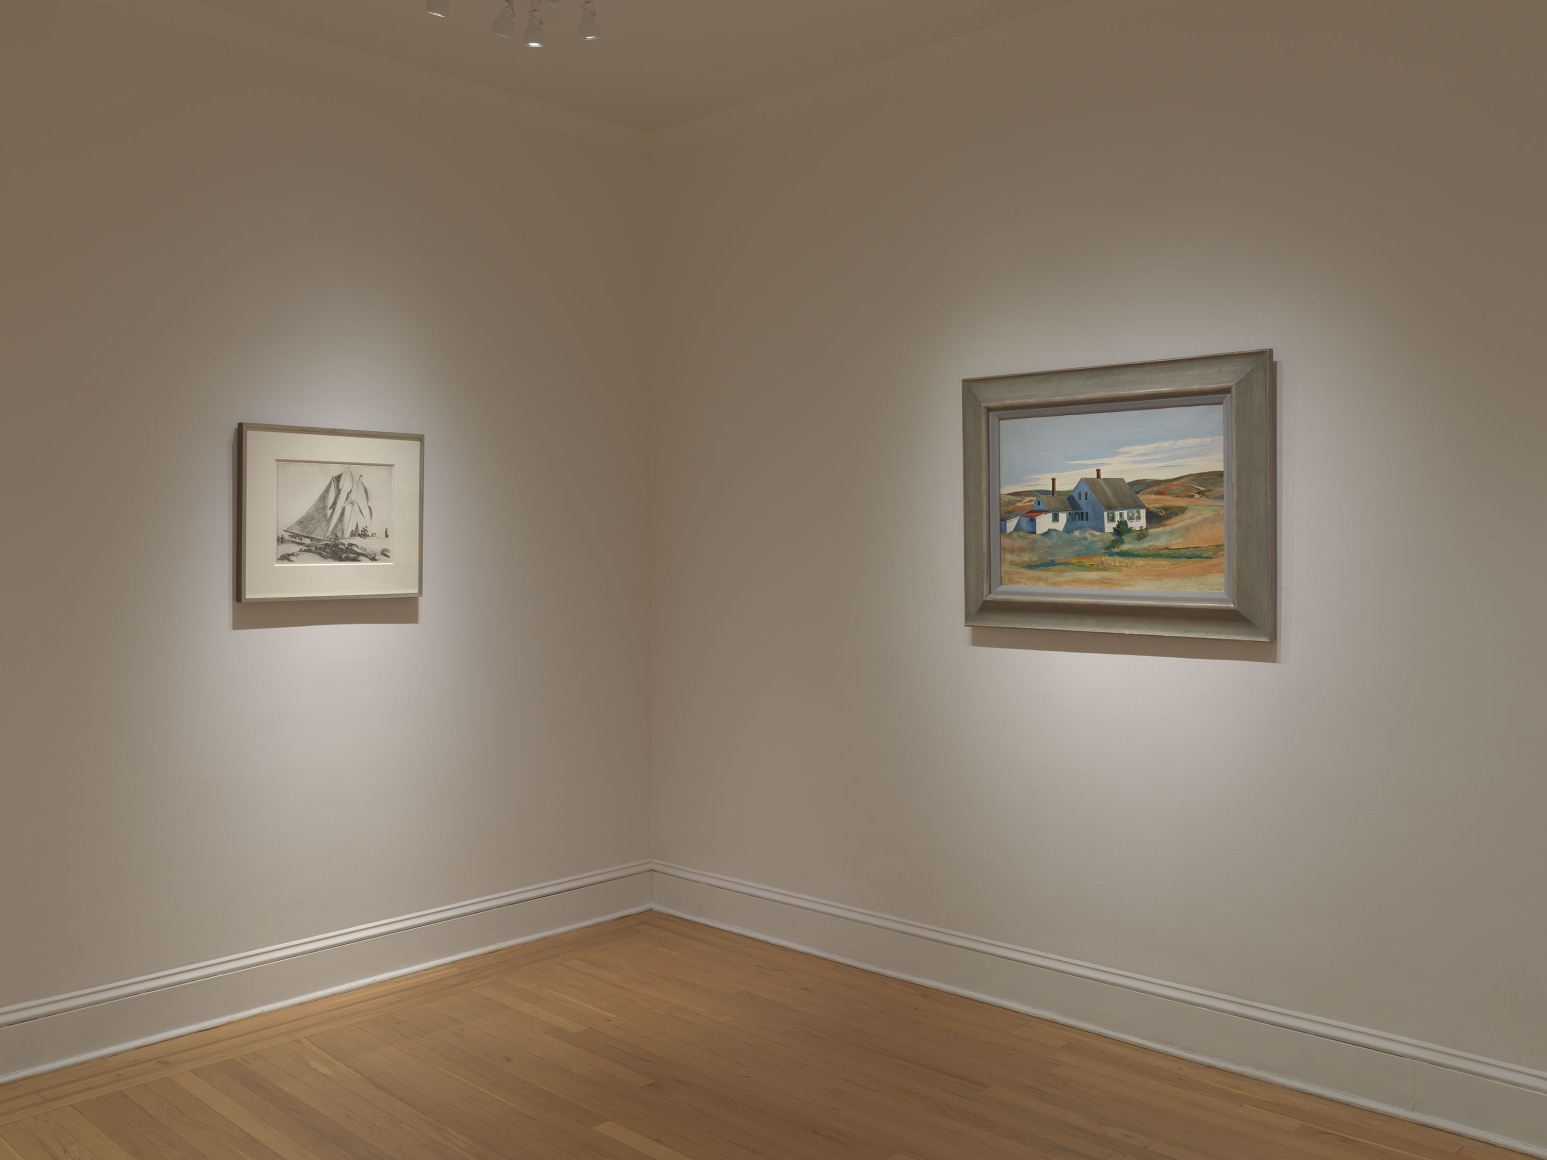 Craig Starr Gallery is pleased to present “Edward Hopper as